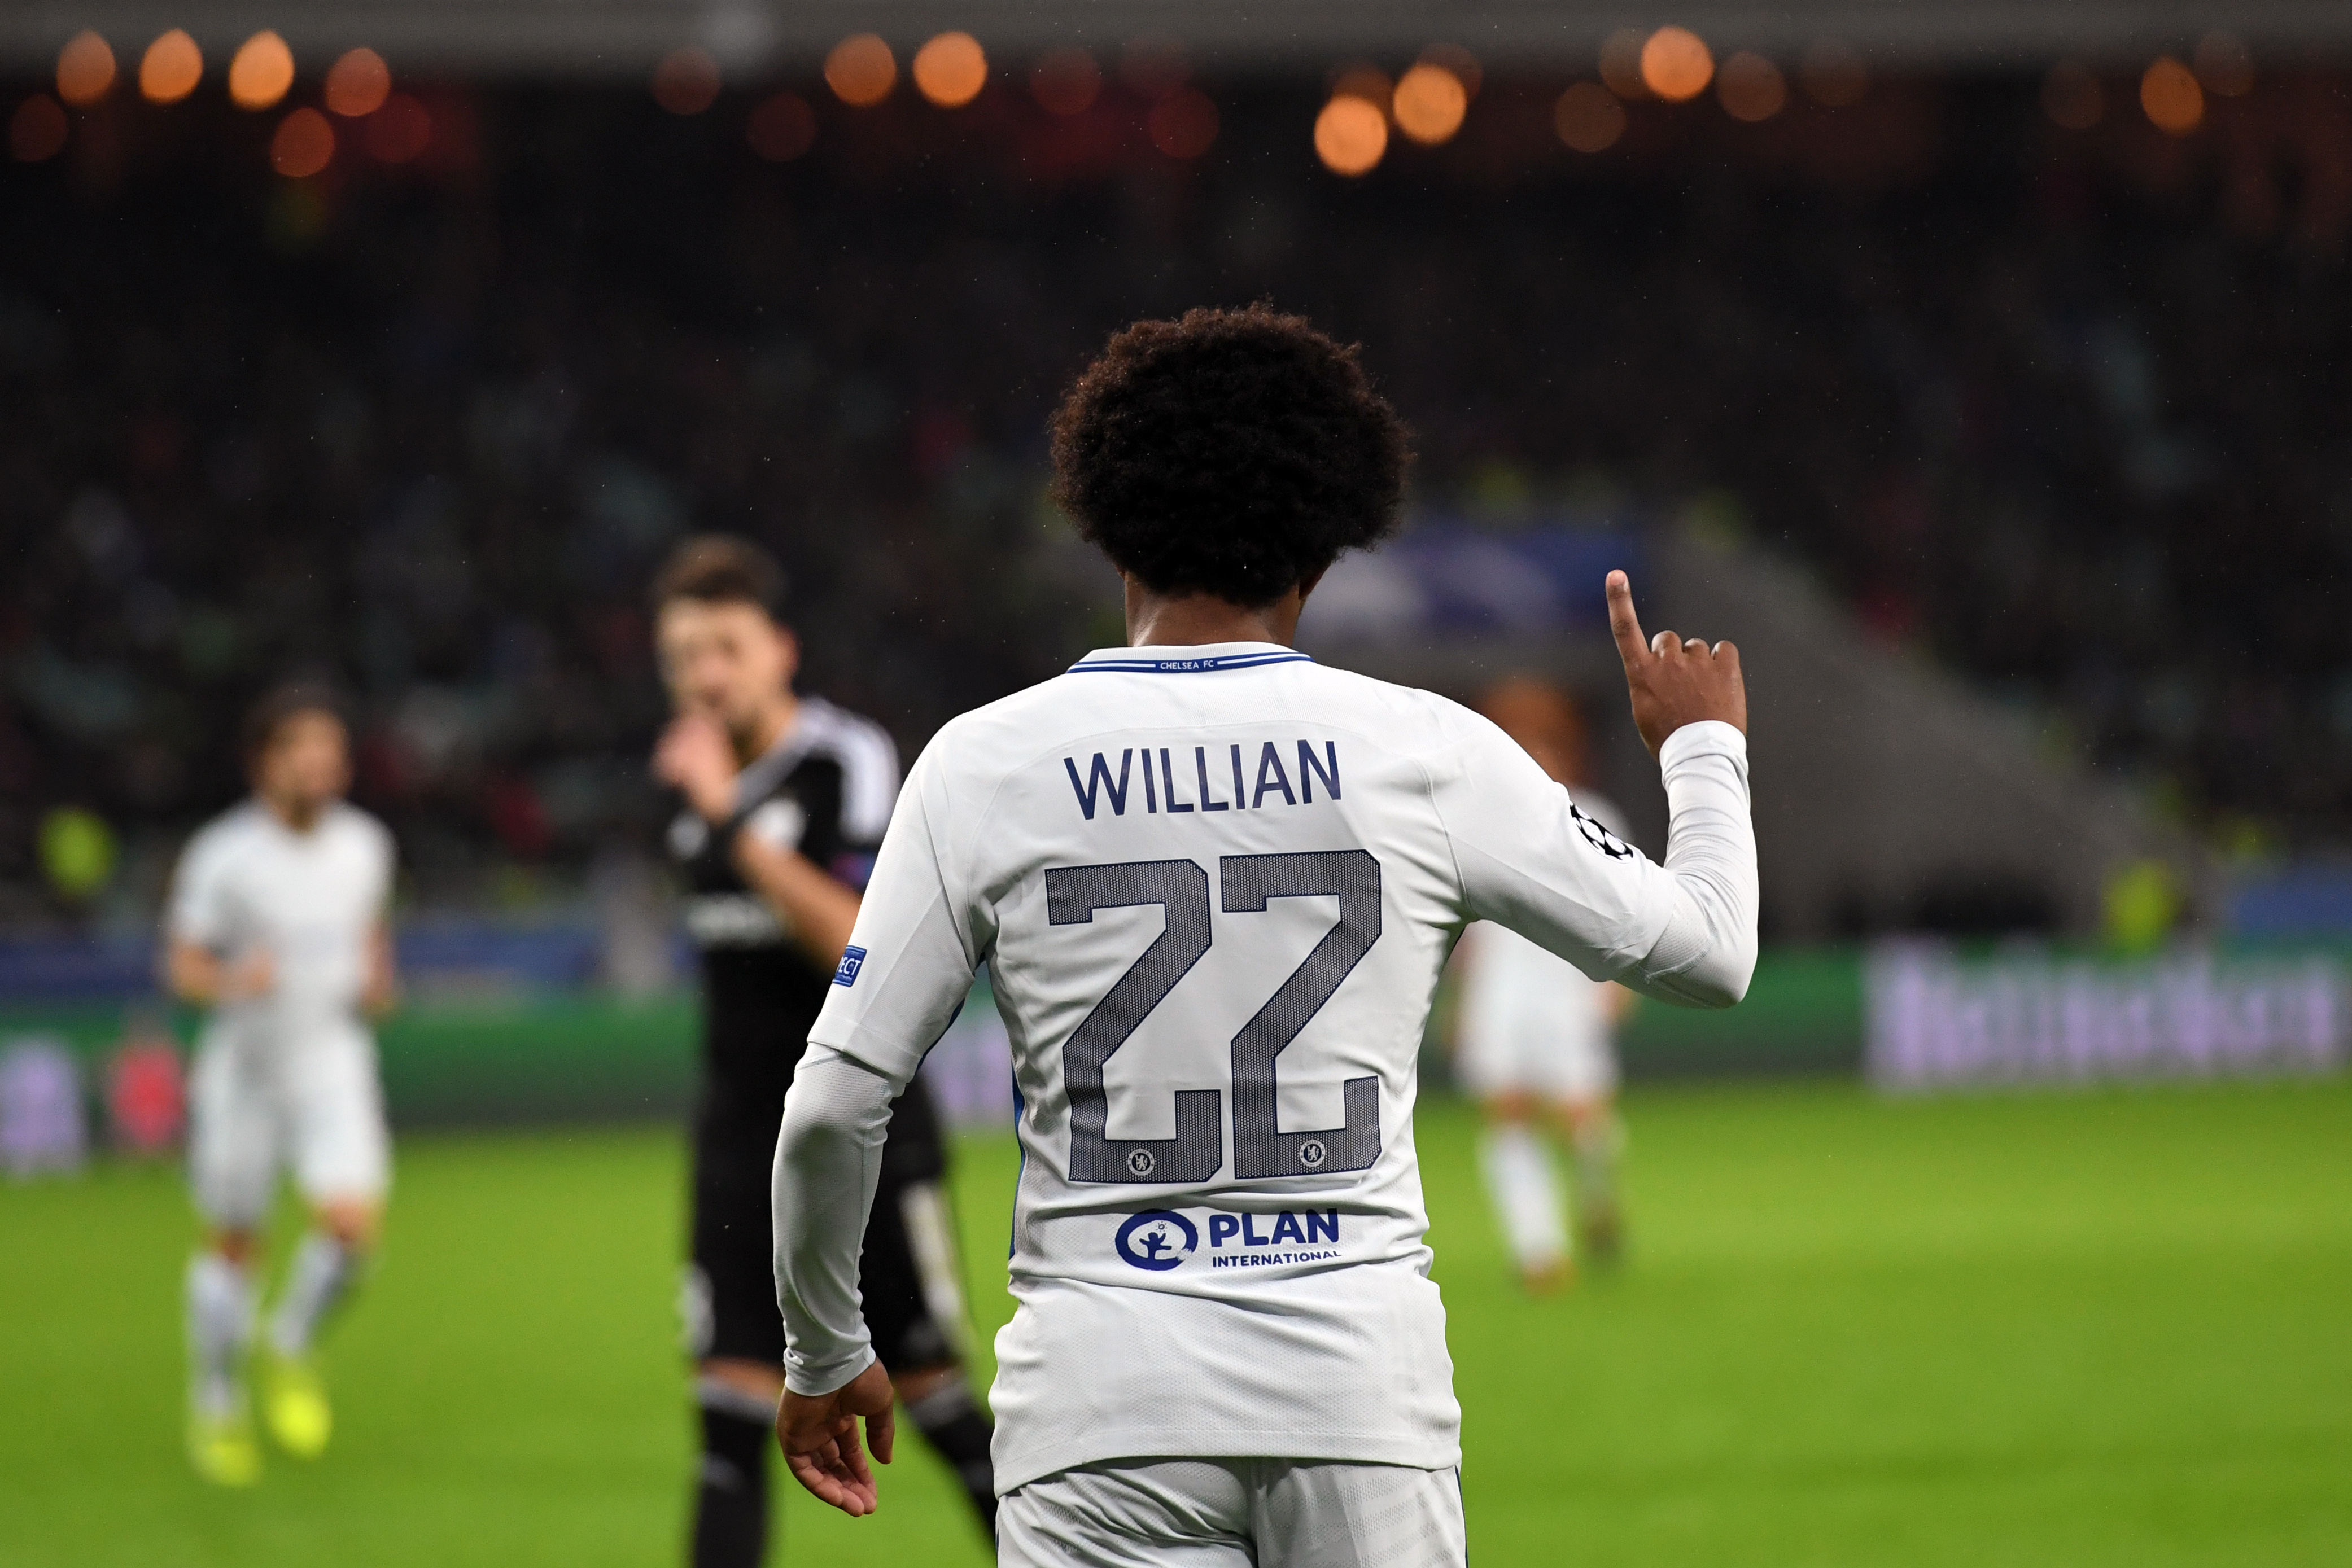 Chelsea's midfielder from Brazil Willian gestures during the UEFA Champions League Group C football match between Qarabag FK and Chelsea FC in Baku on November 22, 2017. / AFP PHOTO / Kirill KUDRYAVTSEV        (Photo credit should read KIRILL KUDRYAVTSEV/AFP/Getty Images)